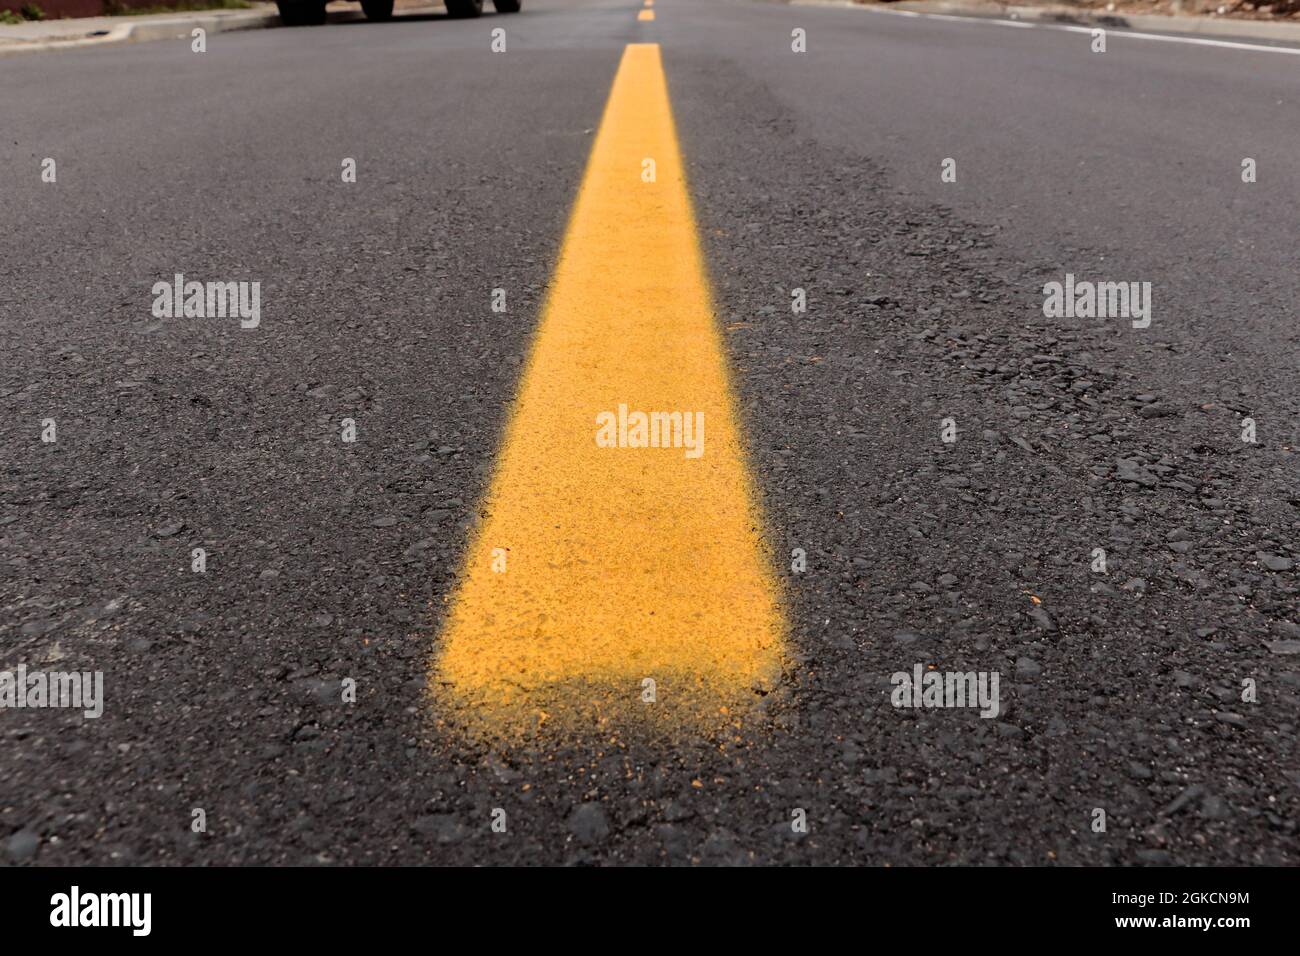 Asphalt track freshly made with some dirt and its texture, with a yellow strip painted in the center of the image and above the street horizon Stock Photo